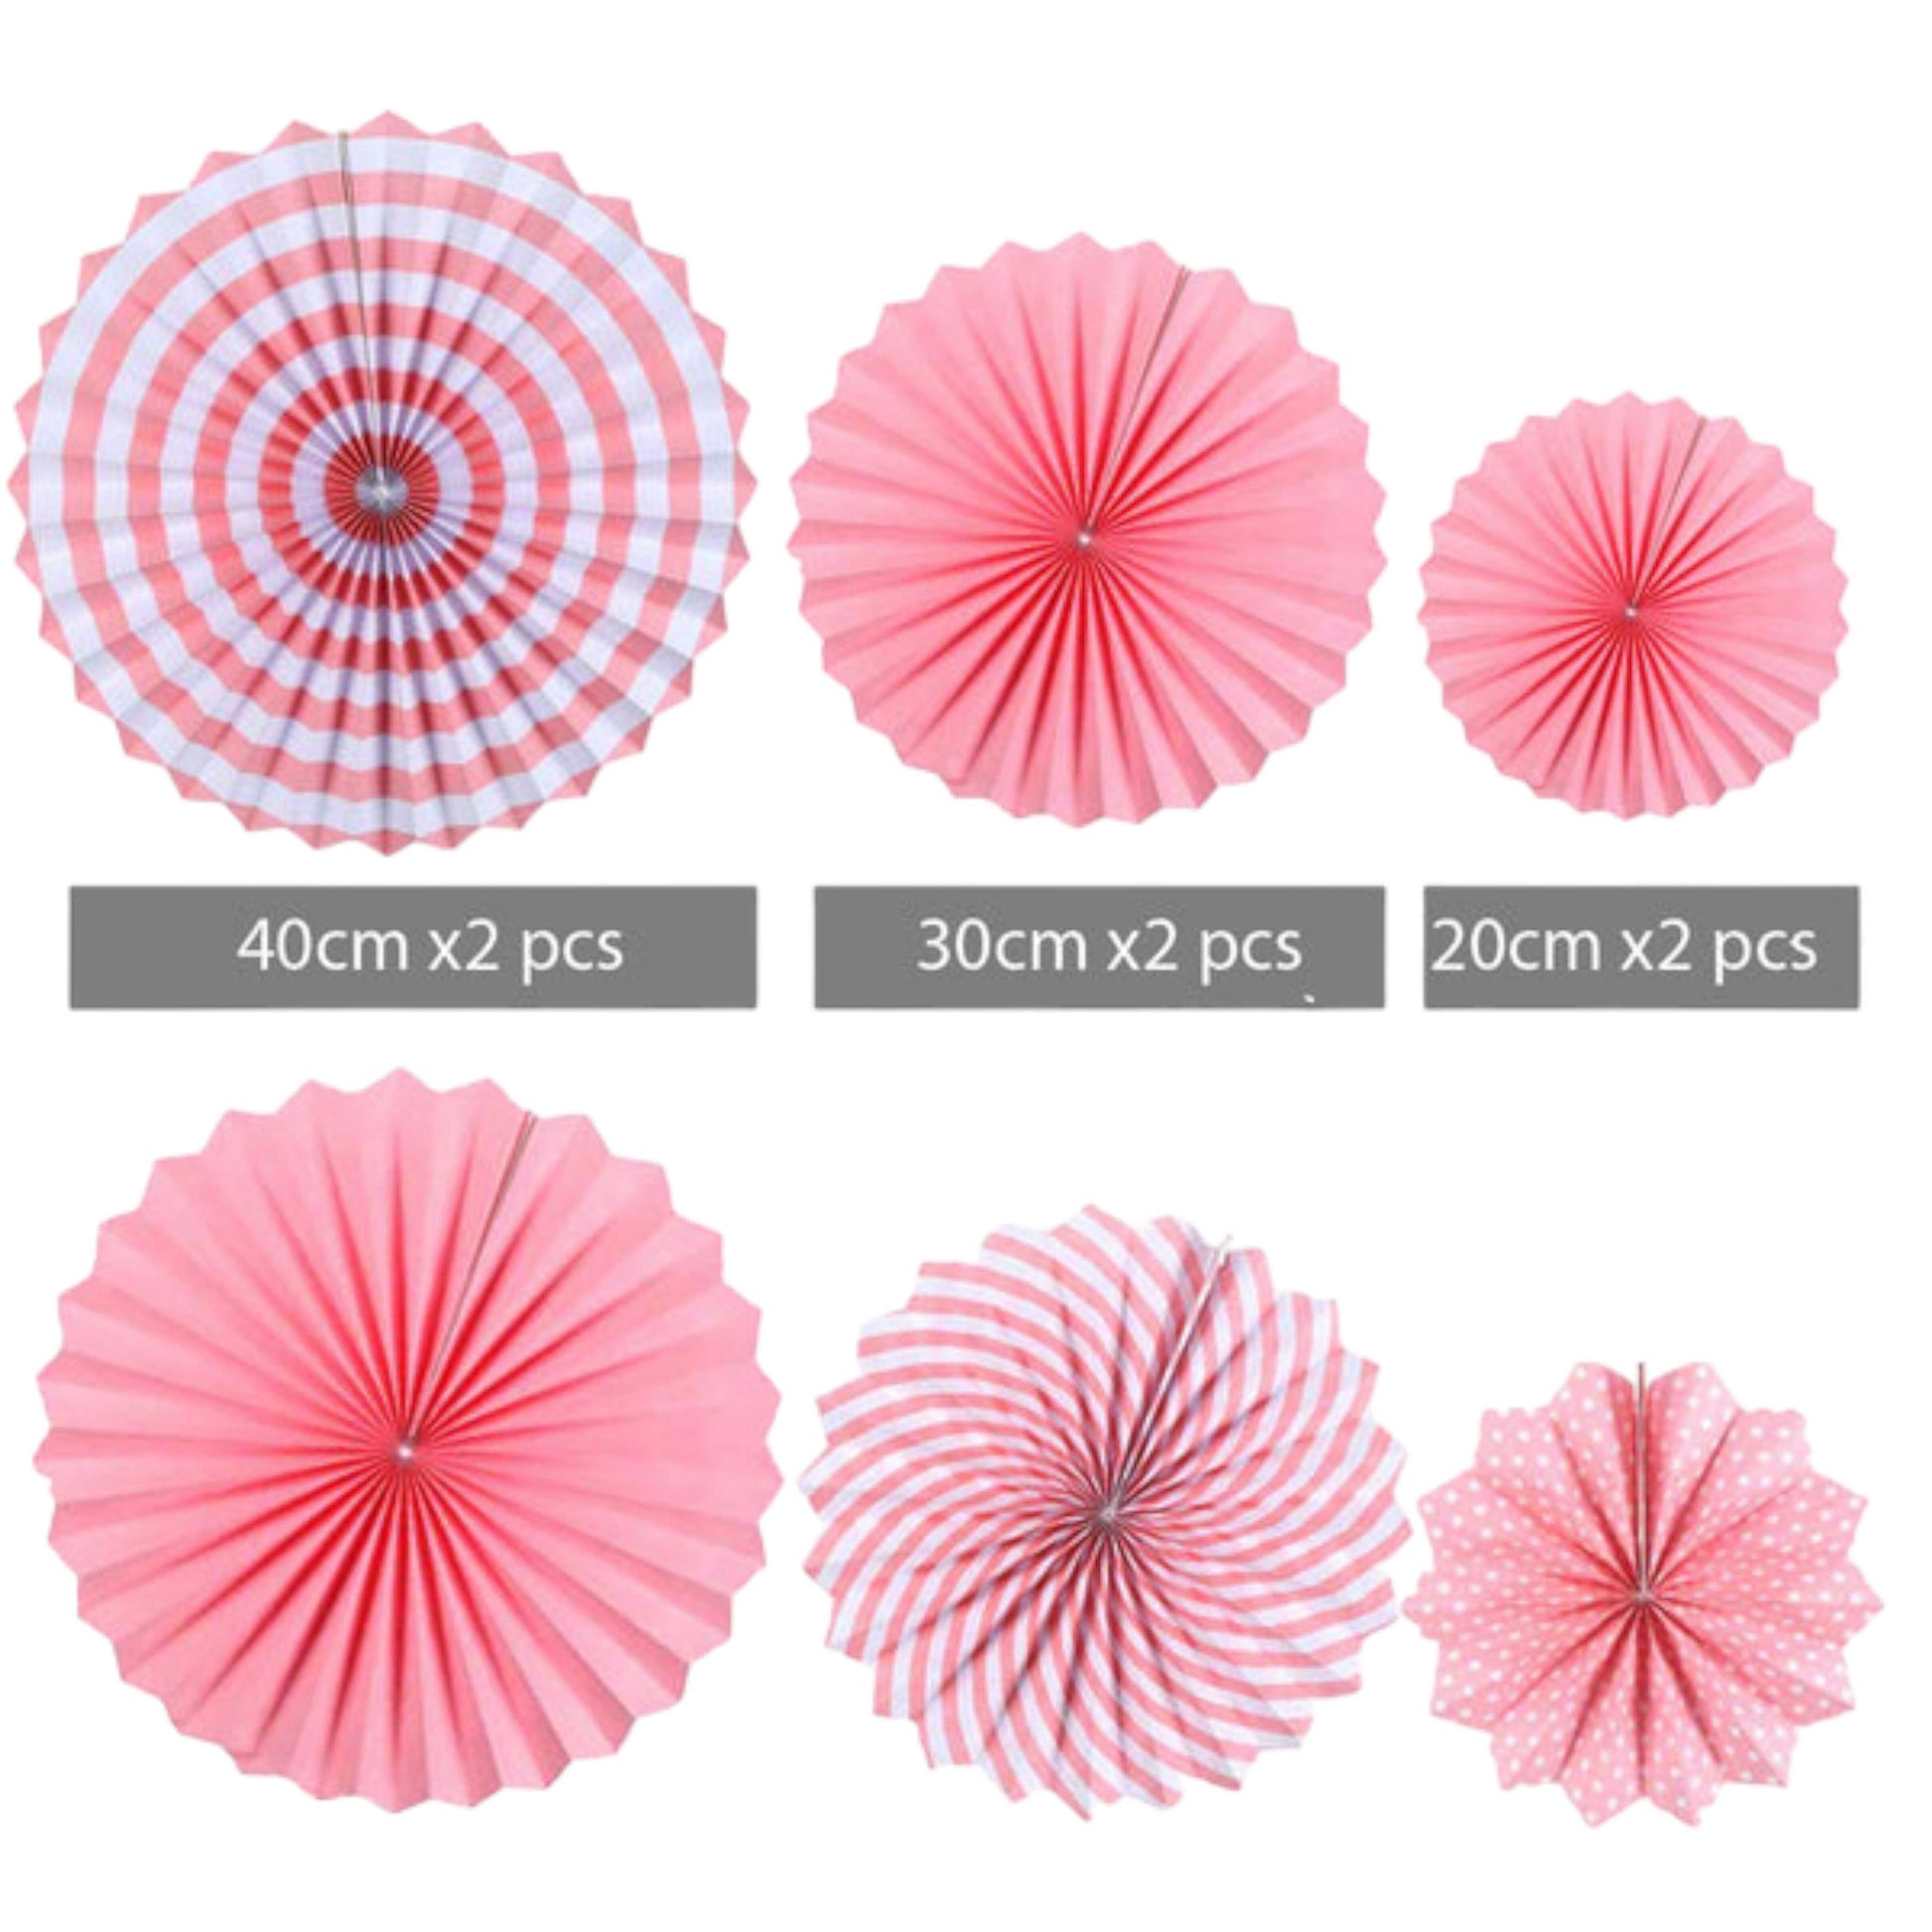 6 Pcs Round Shape Japanes Decorative Backdrop Hanging Paper Fan Set For Party, Birthday, Wedding, Fastivals, Room Decoration